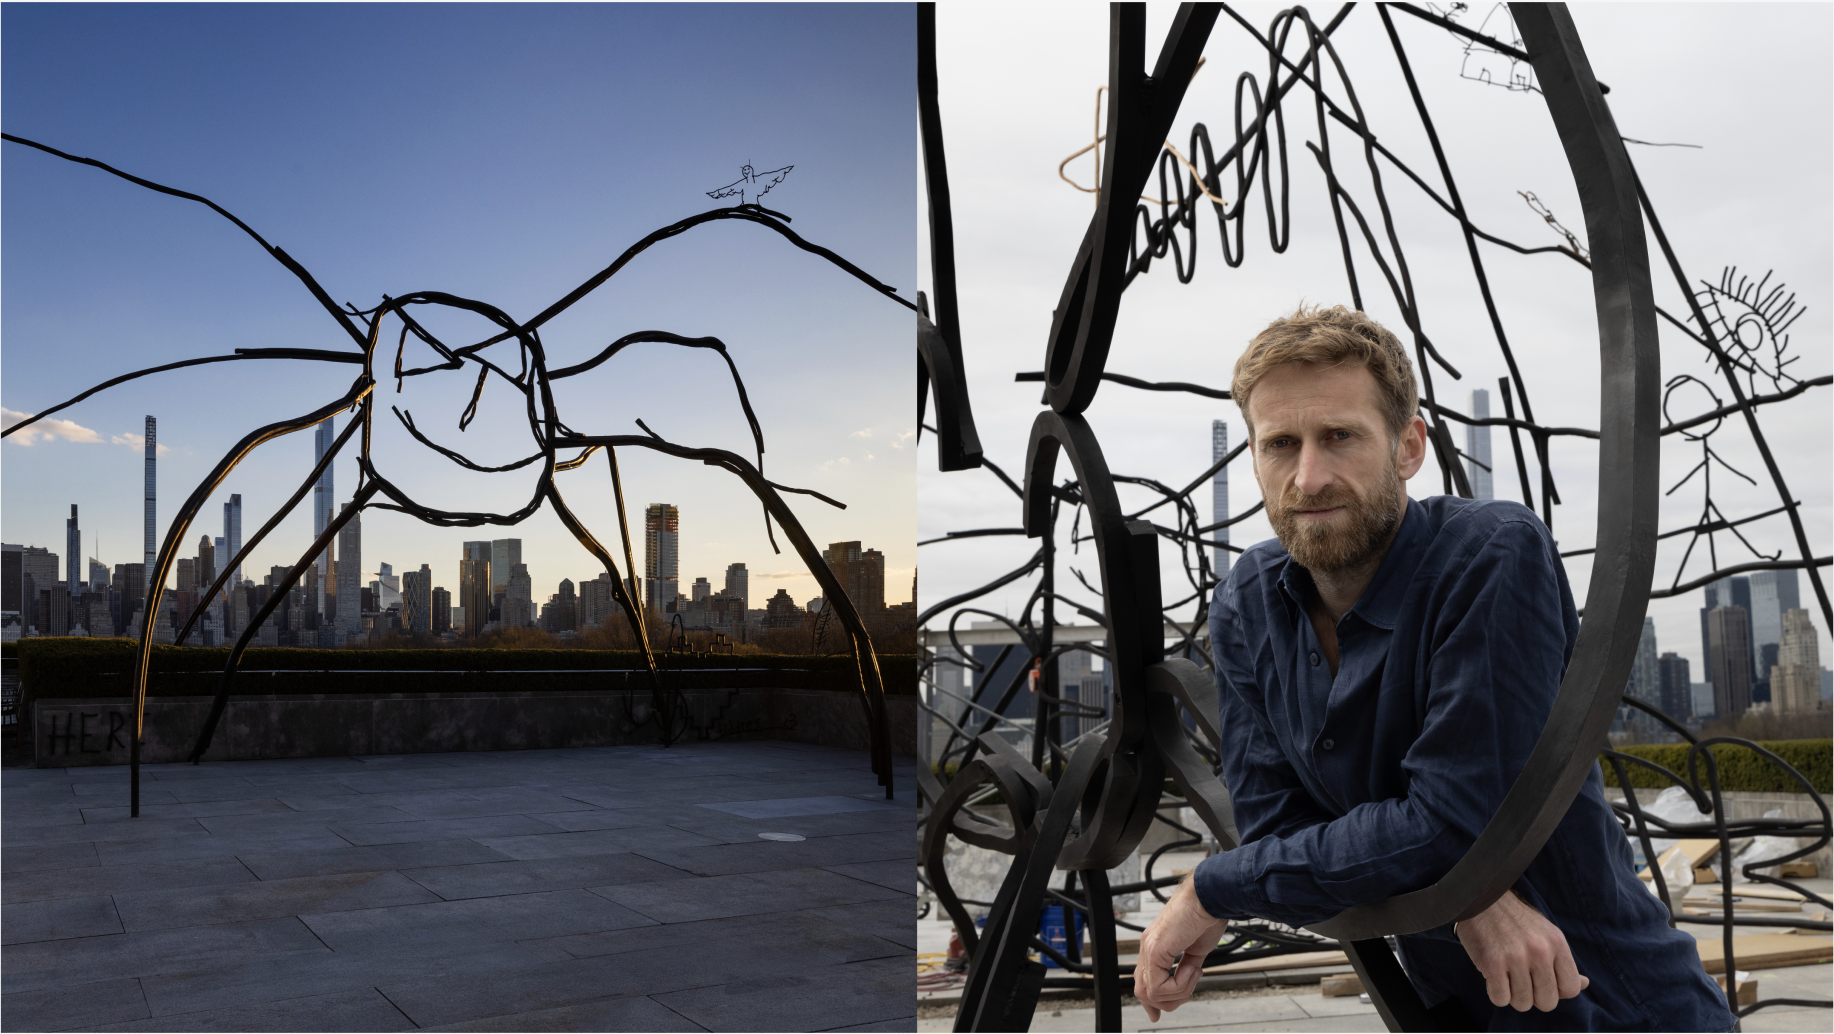 Two photo side by side, the left: sculpture of a giant spider with the city skyline blue, in the background. The image on the right is the artist, standing in between a sculpture.